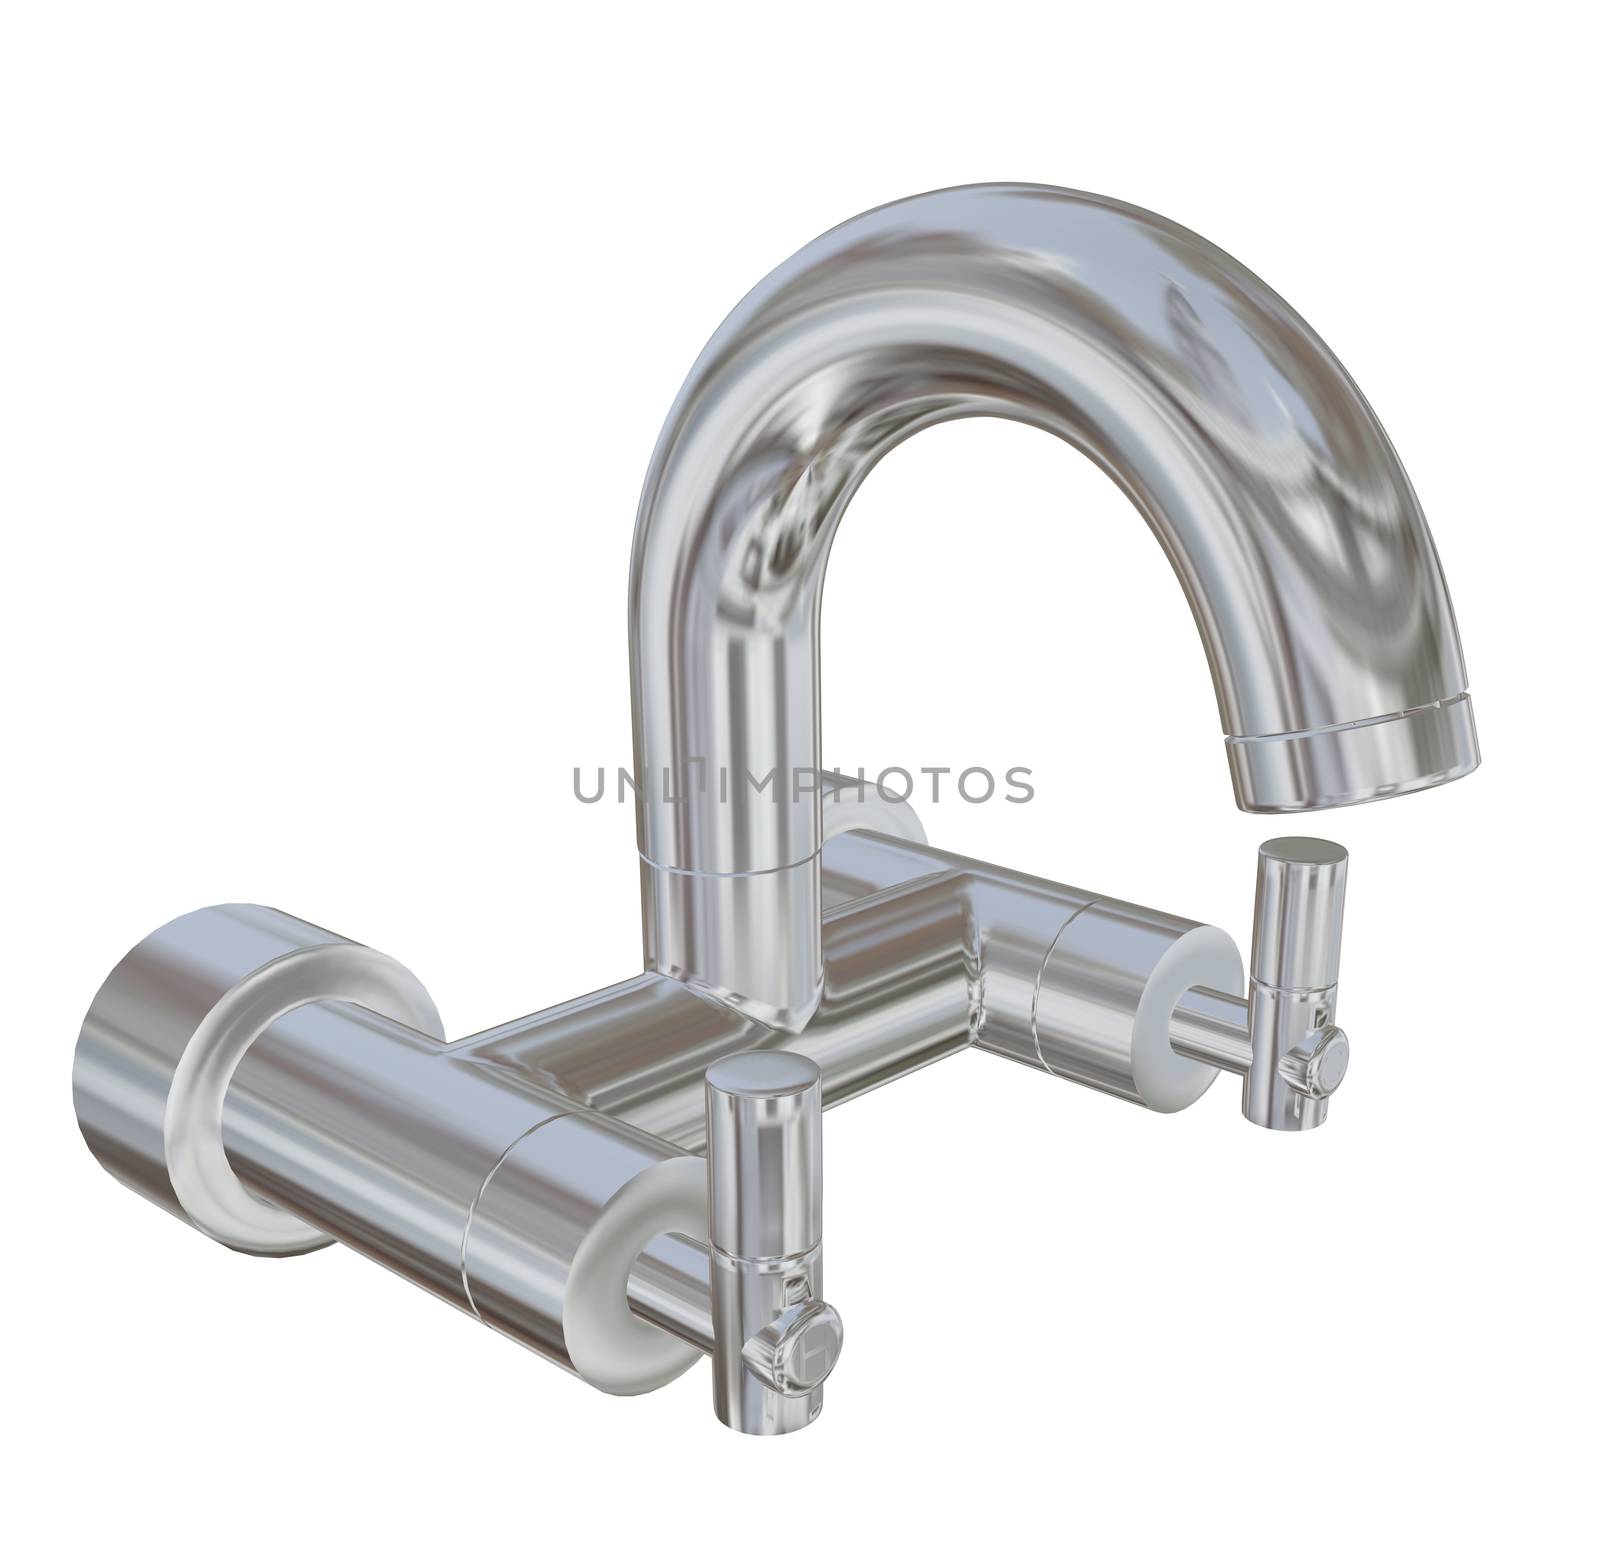 Modern faucet with chrome finishing, 3d illustration, isolated against a white background